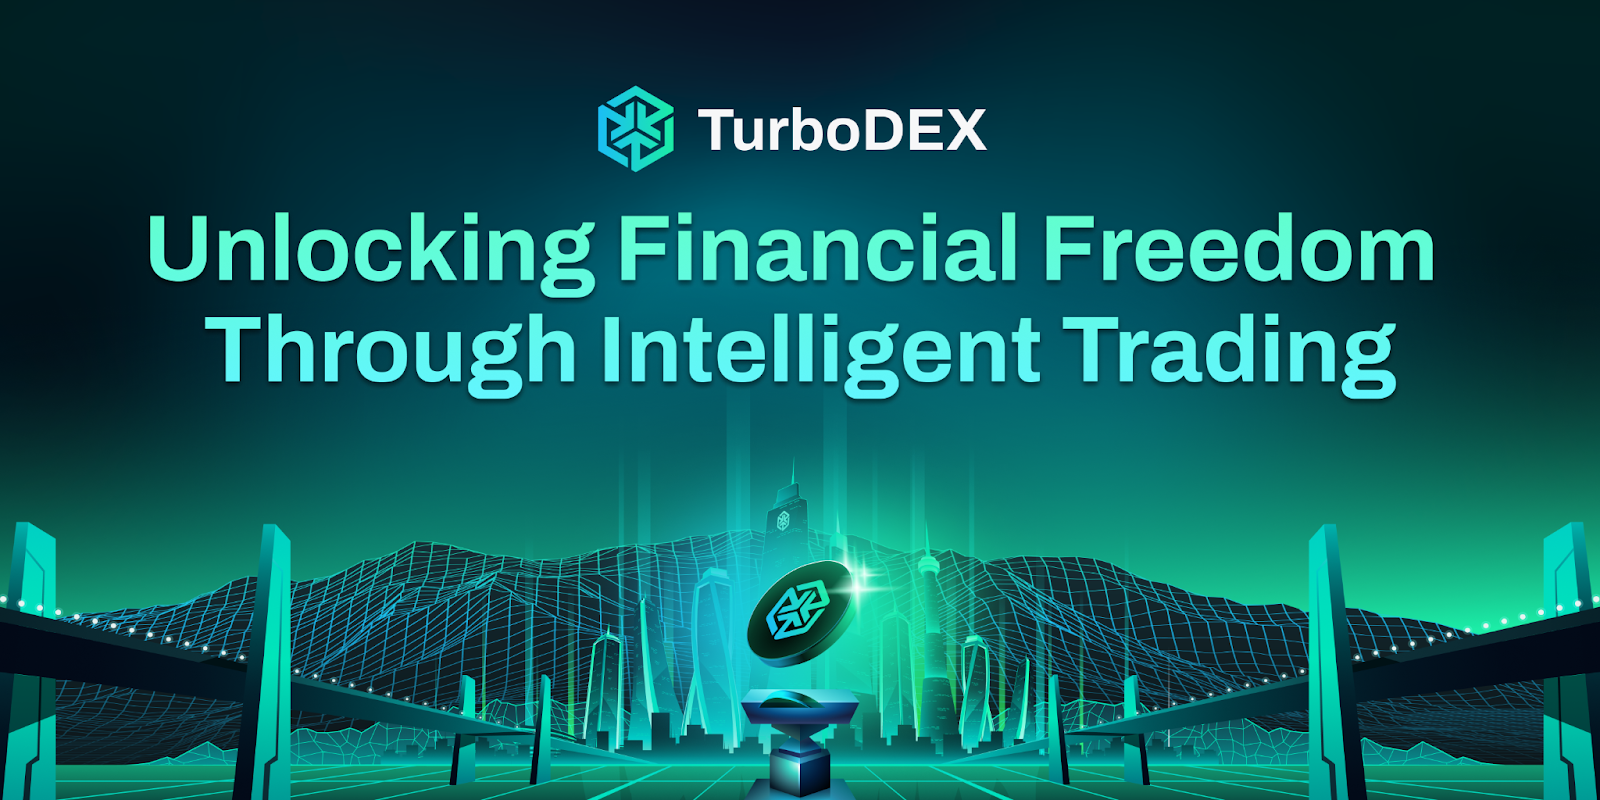 TurboDEX Secures $20 Million in Seed Funding to Propel the TurboX Token (TBX) and Expand Trading Platform